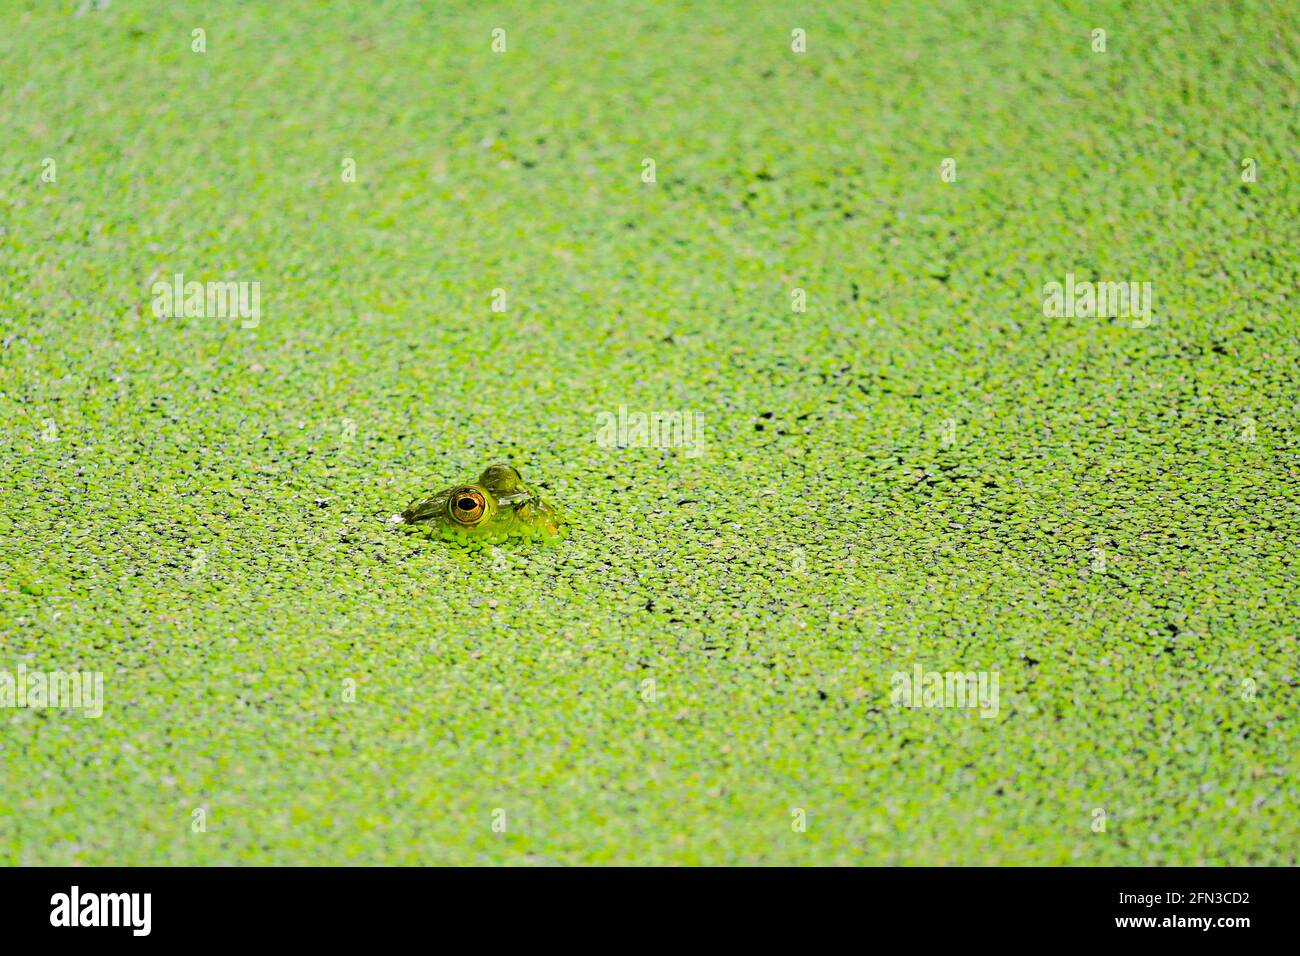 American bullfrog (Lithobates catesbeianus) in pond covered with duckweed. Salt Creek Nature Preserve, Cook County, Illinois. Stock Photo